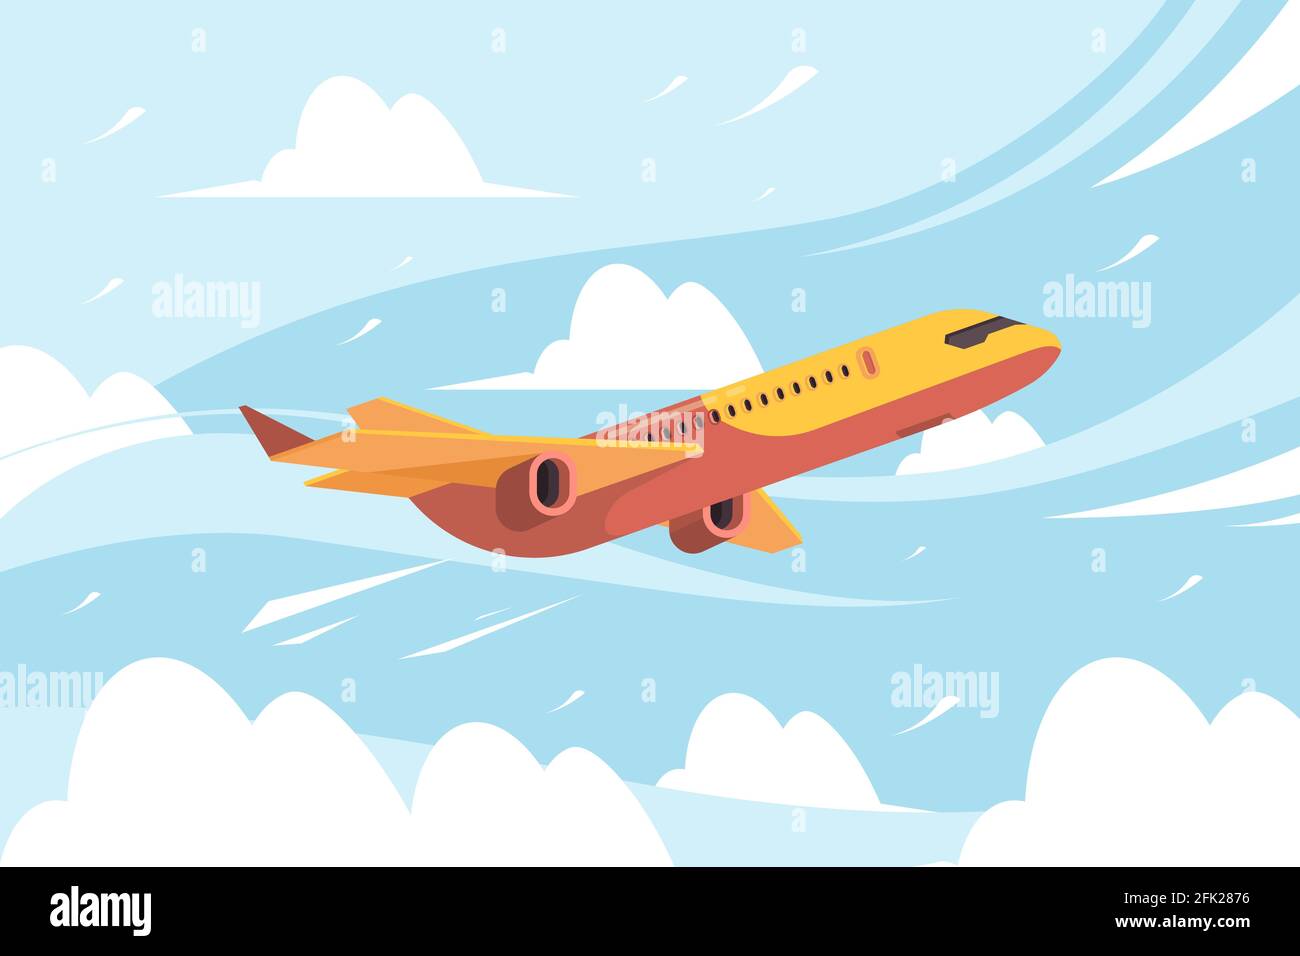 Airplane in sky. Flying civil aircraft transport in clouds vector flat background Stock Vector